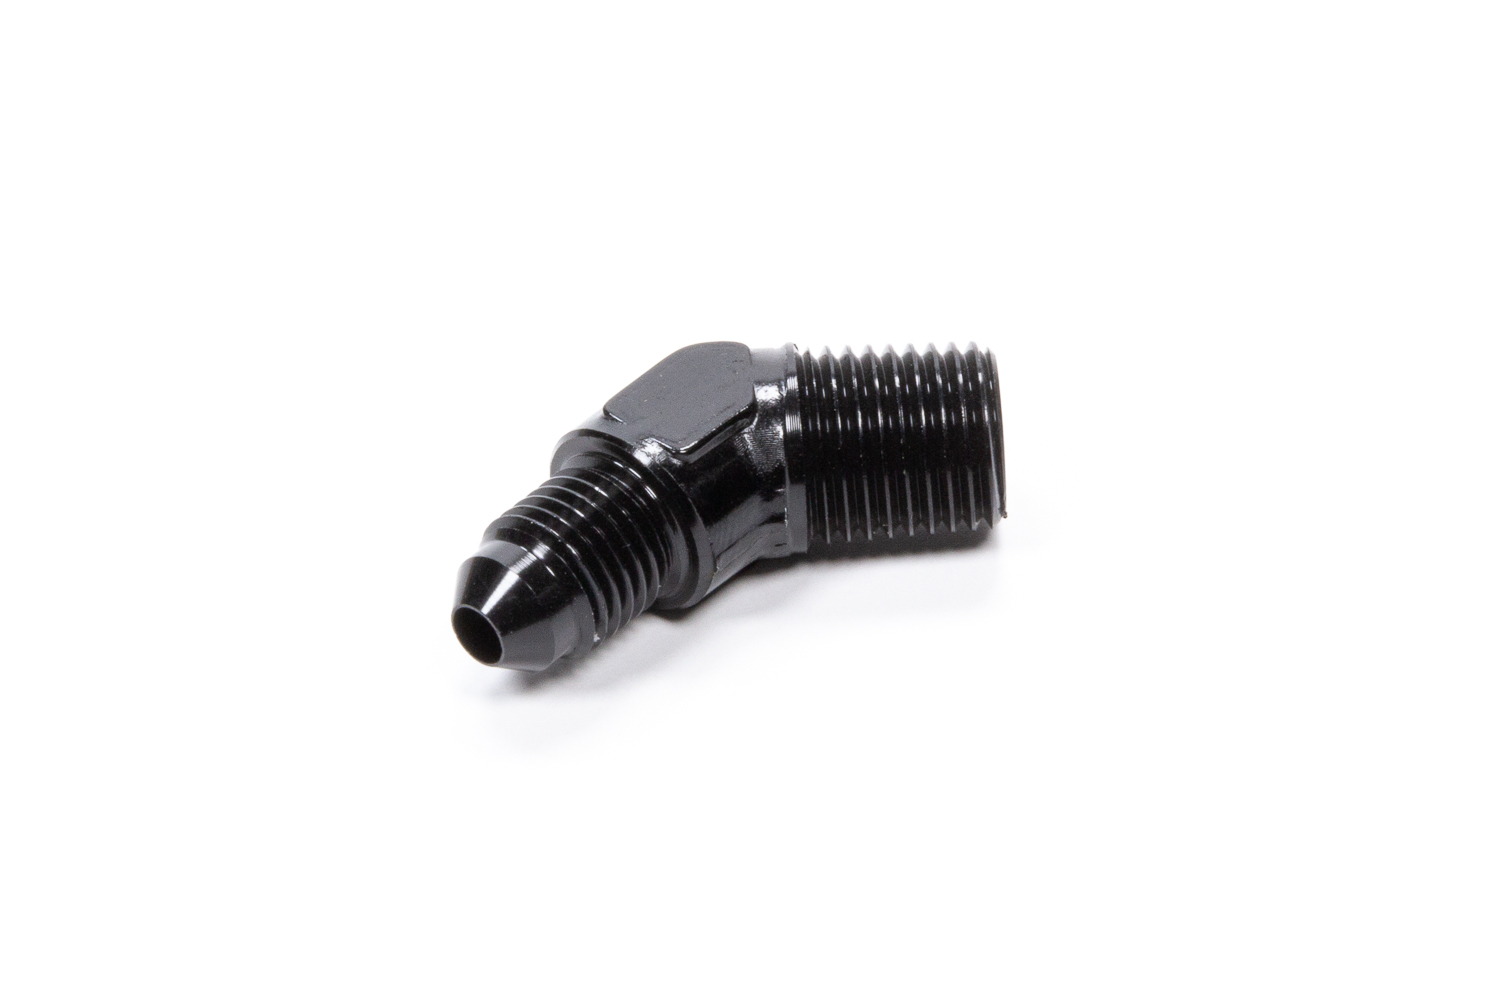 Fragola 482344-BL - Fitting, Adapter, 45 Degree, 4 AN Male to 1/4 in NPT Male, Aluminum, Black Anodized, Each